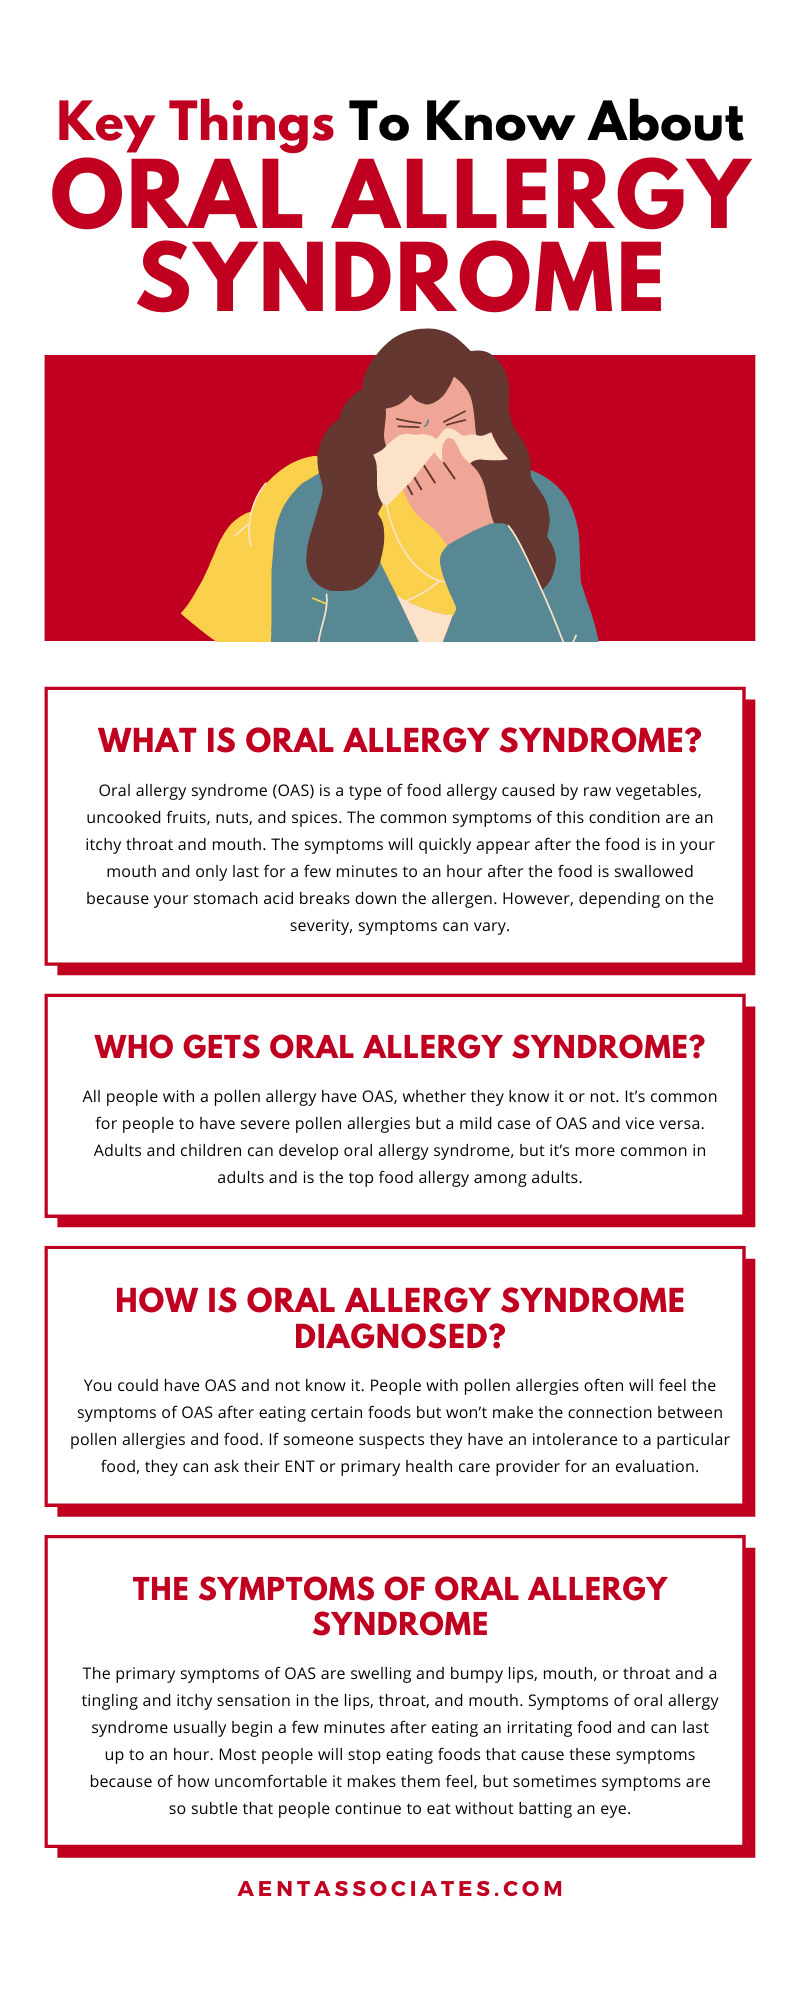 6 Key Things To Know About Oral Allergy Syndrome